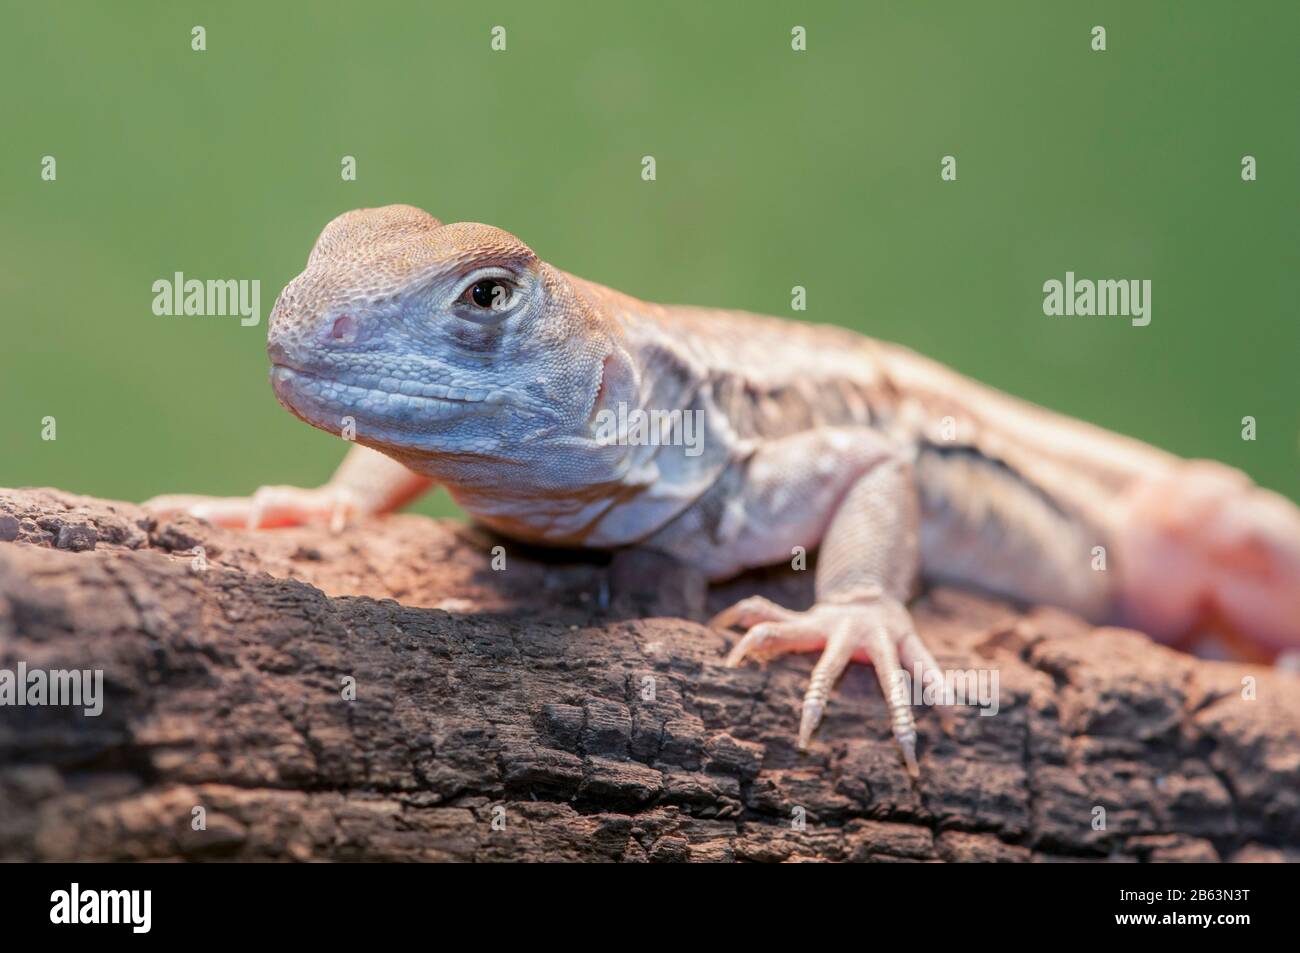 Owatonna, Minnesota.  Reptile and Amphibian Discovery Zoo.  Butterfly Agama,  Leiolepis belliana. Stock Photo